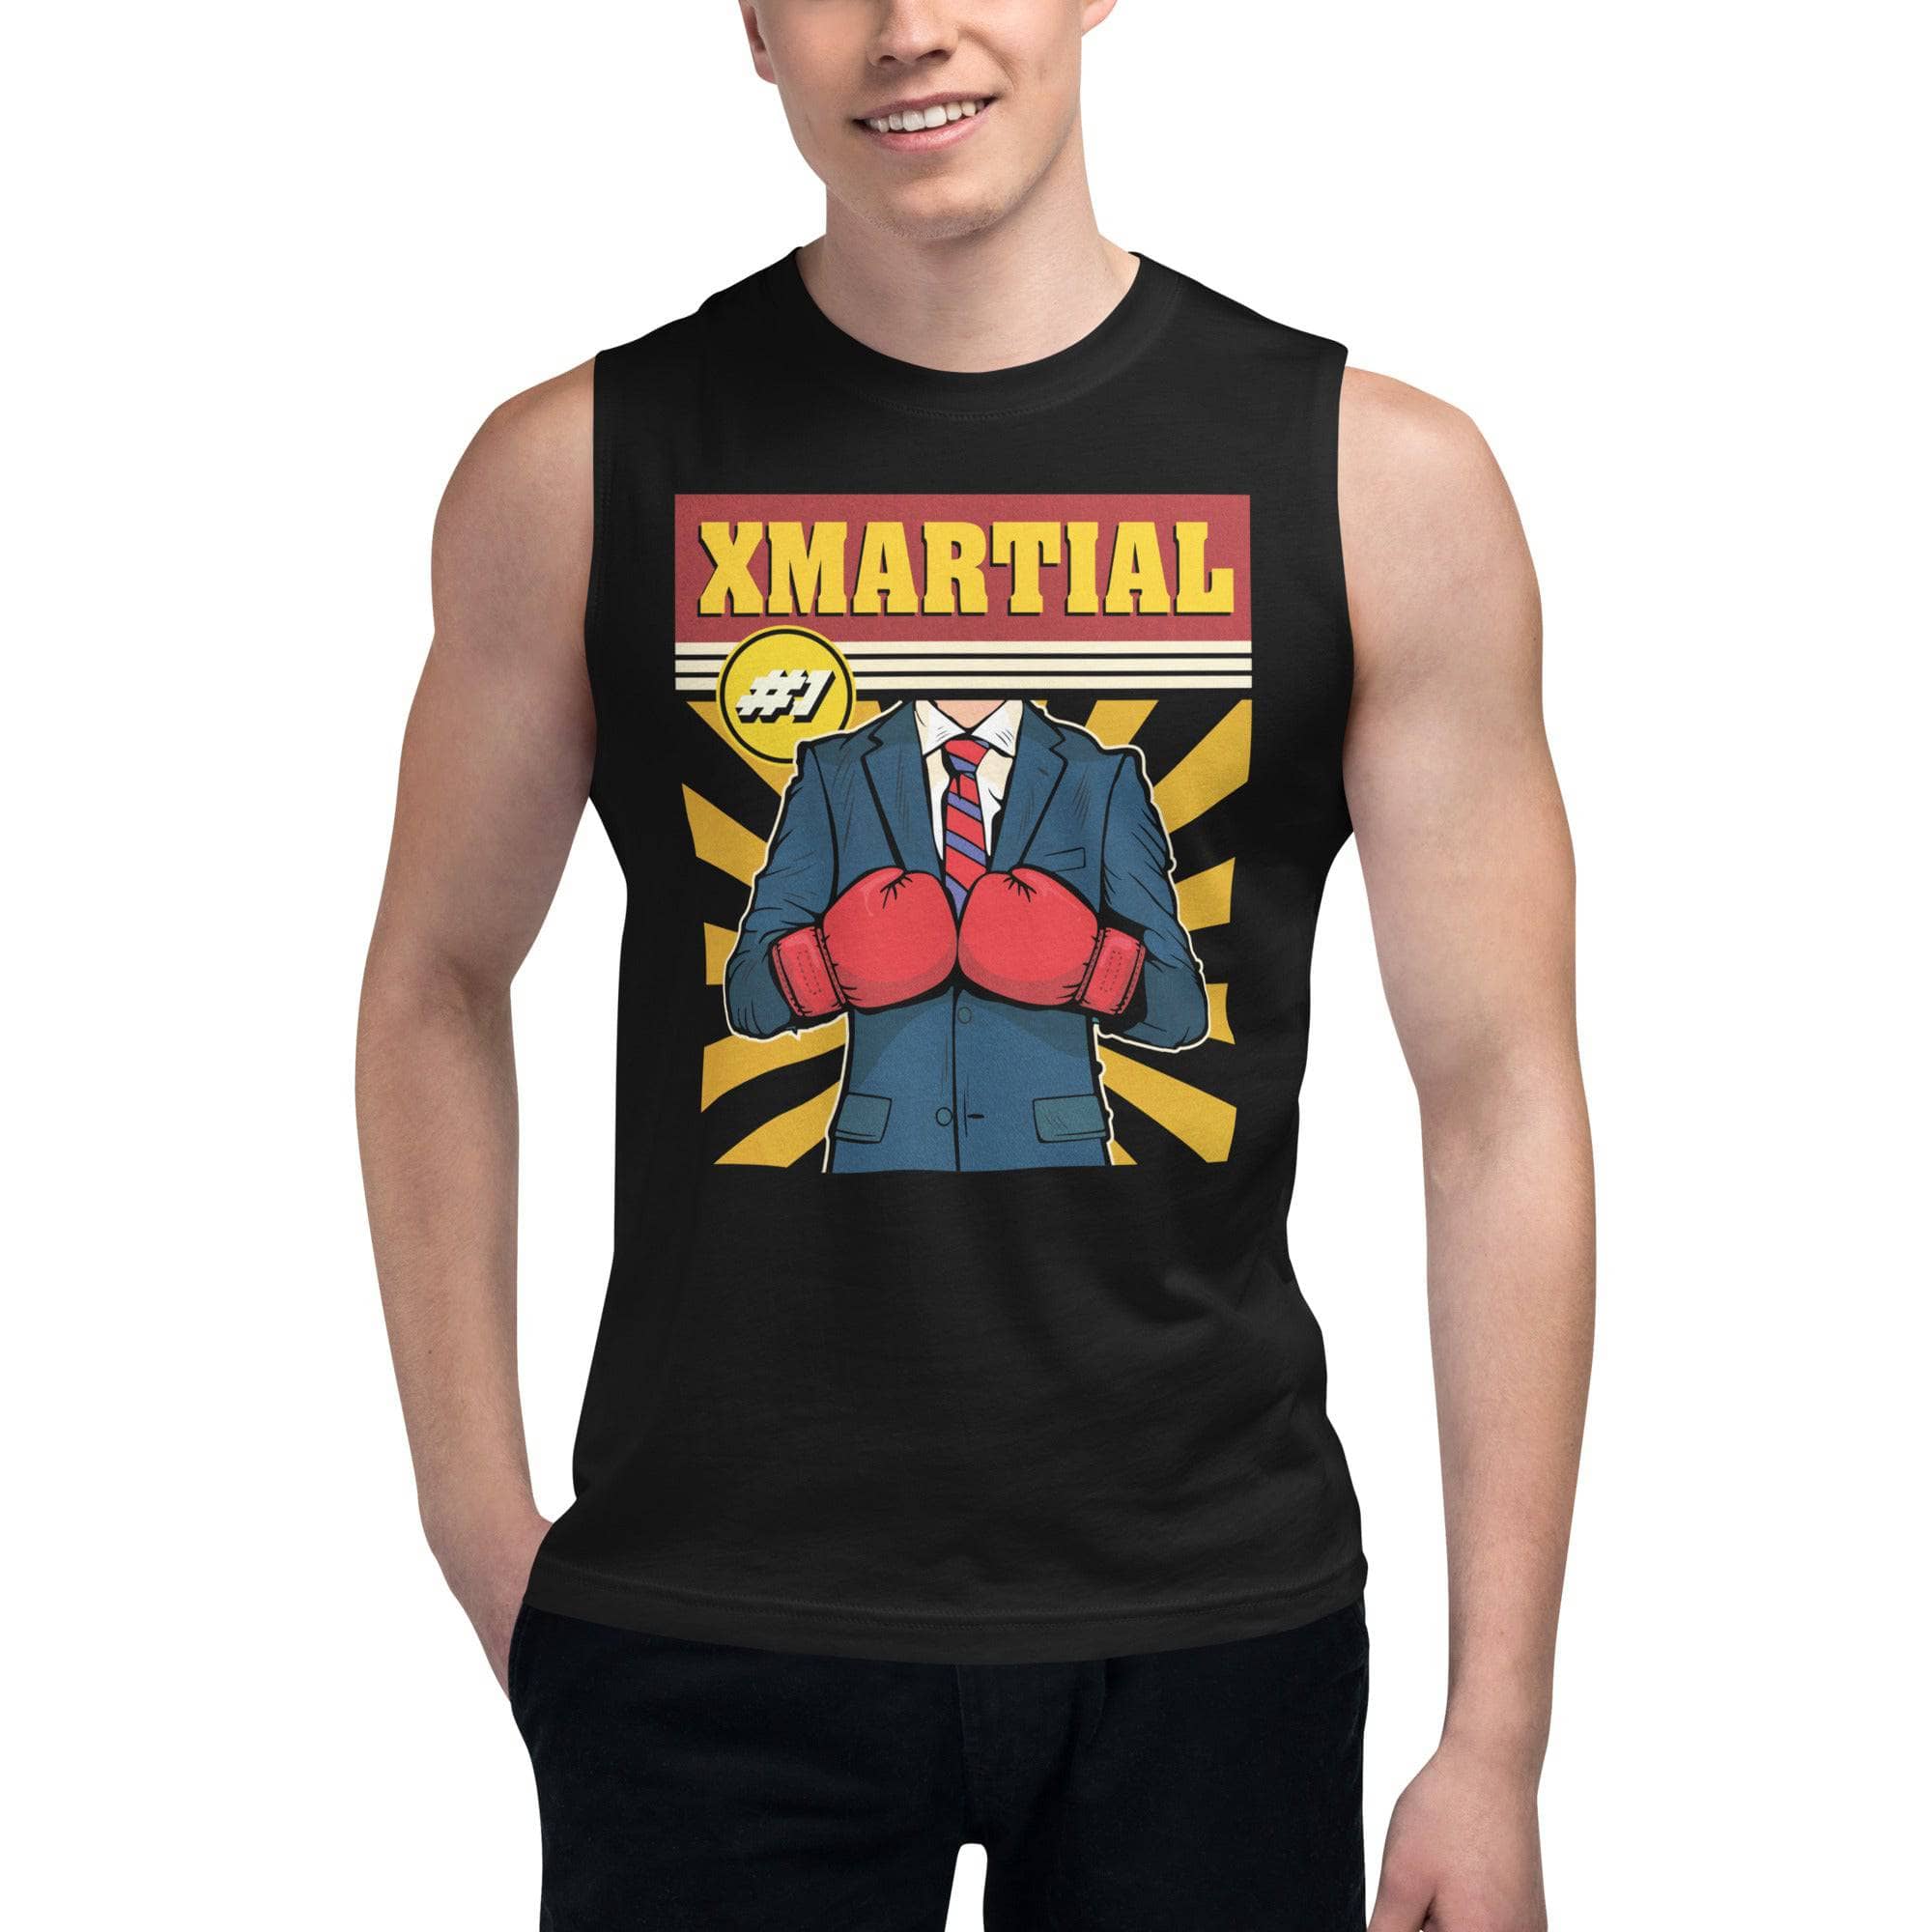 Number One Muay Thai Shirts & Hoodie XMARTIAL